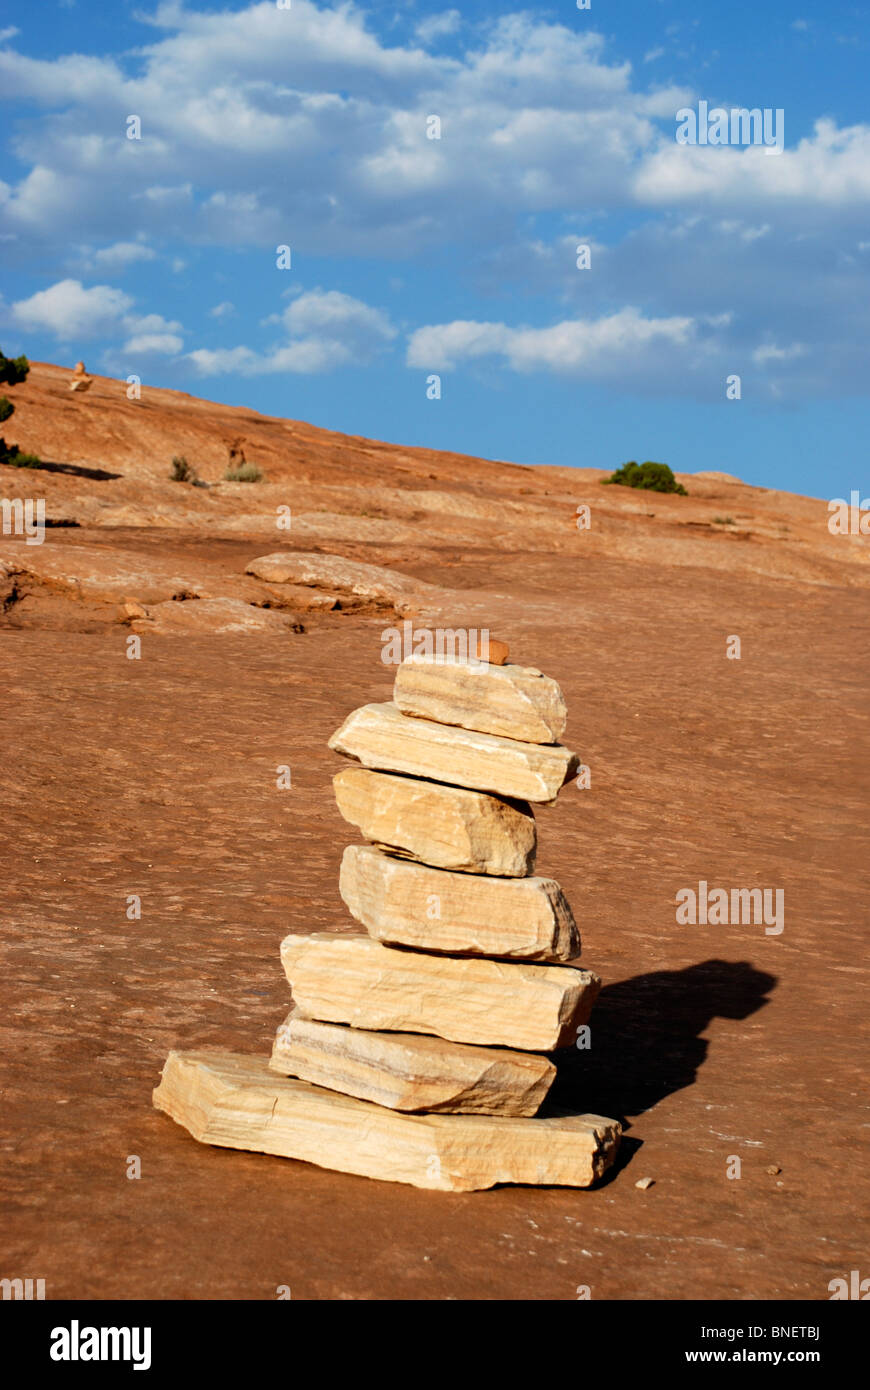 Rock pile trail marker on rocky surface near Delicate Arch in Arches National Park, Utah, USA Stock Photo